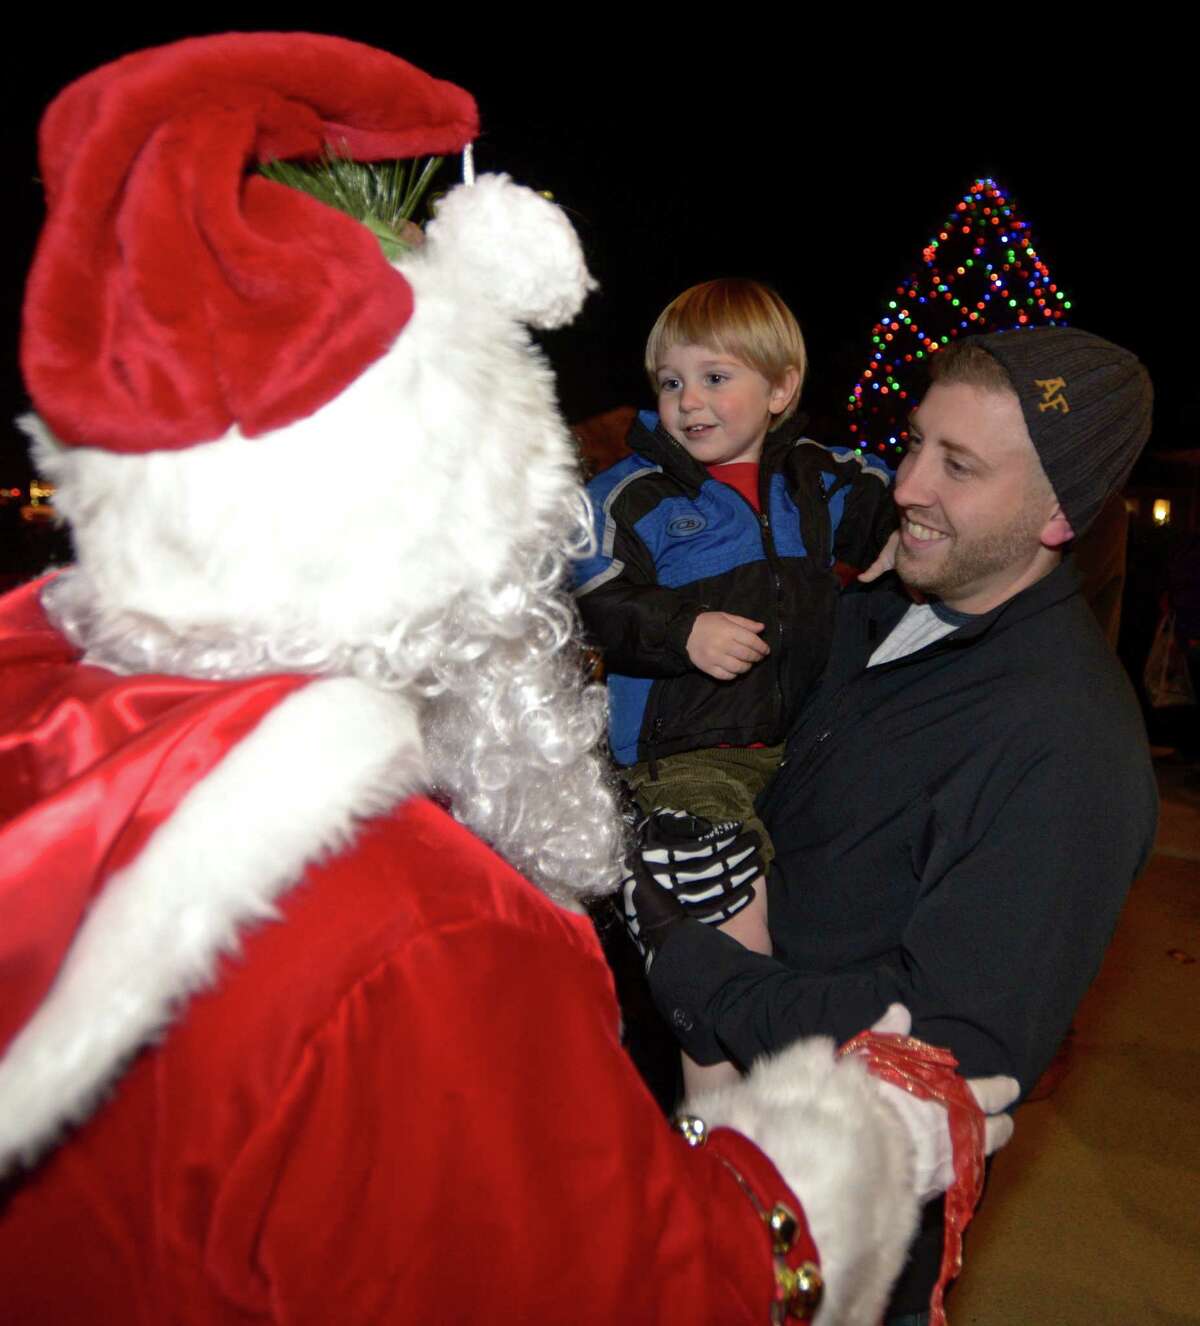 Santa is greeted by Eljah Fille, 2, of Torrington, and his dad Robert after he arrived in a horse-drawn hay wagon for Washington's "Holiday in the Depot", on Friday night, December 11, 2015, in Washington, Conn.